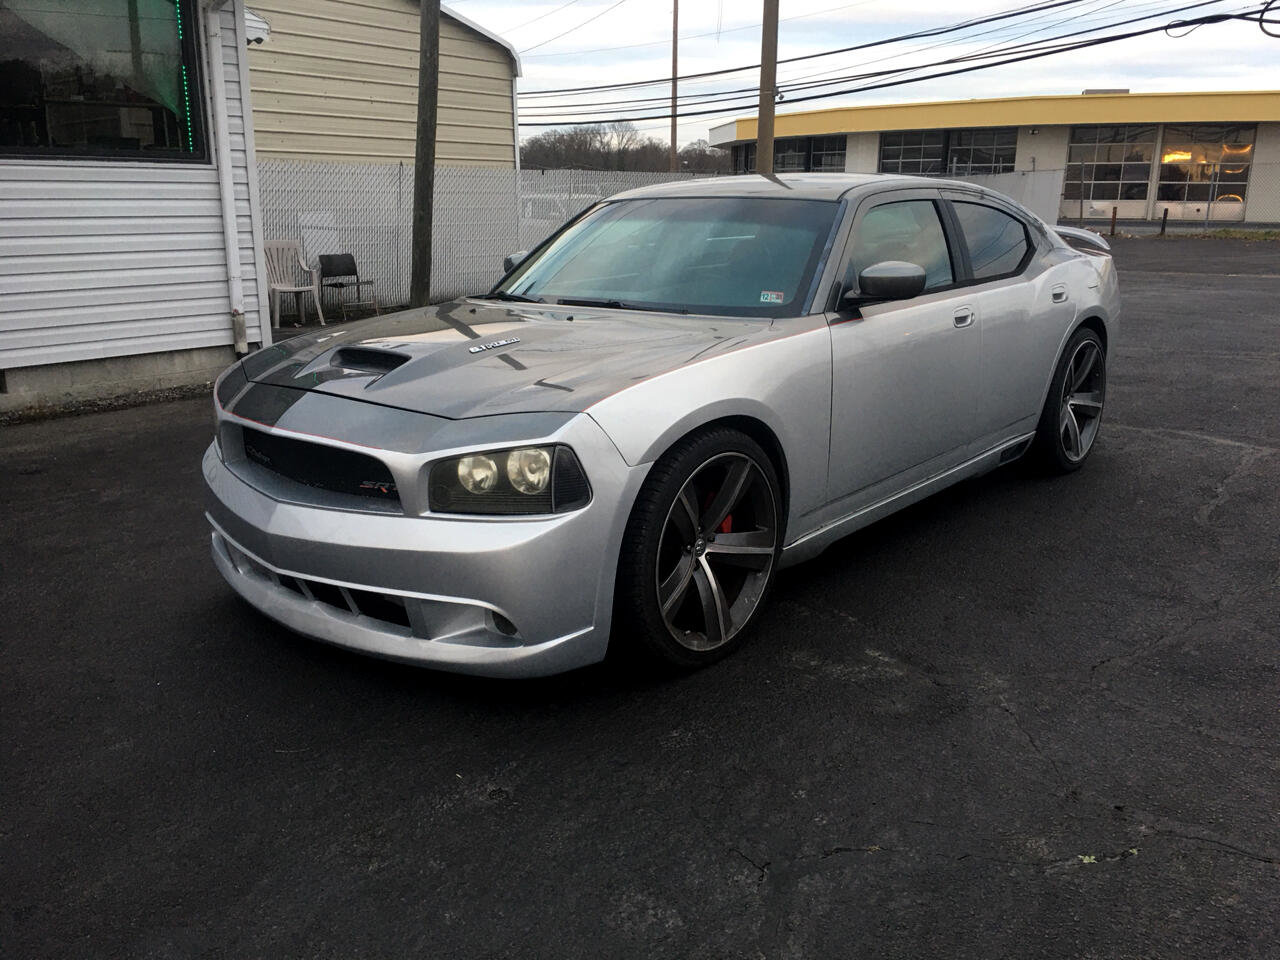 Used 2006 Dodge Charger for Sale Right Now - Autotrader